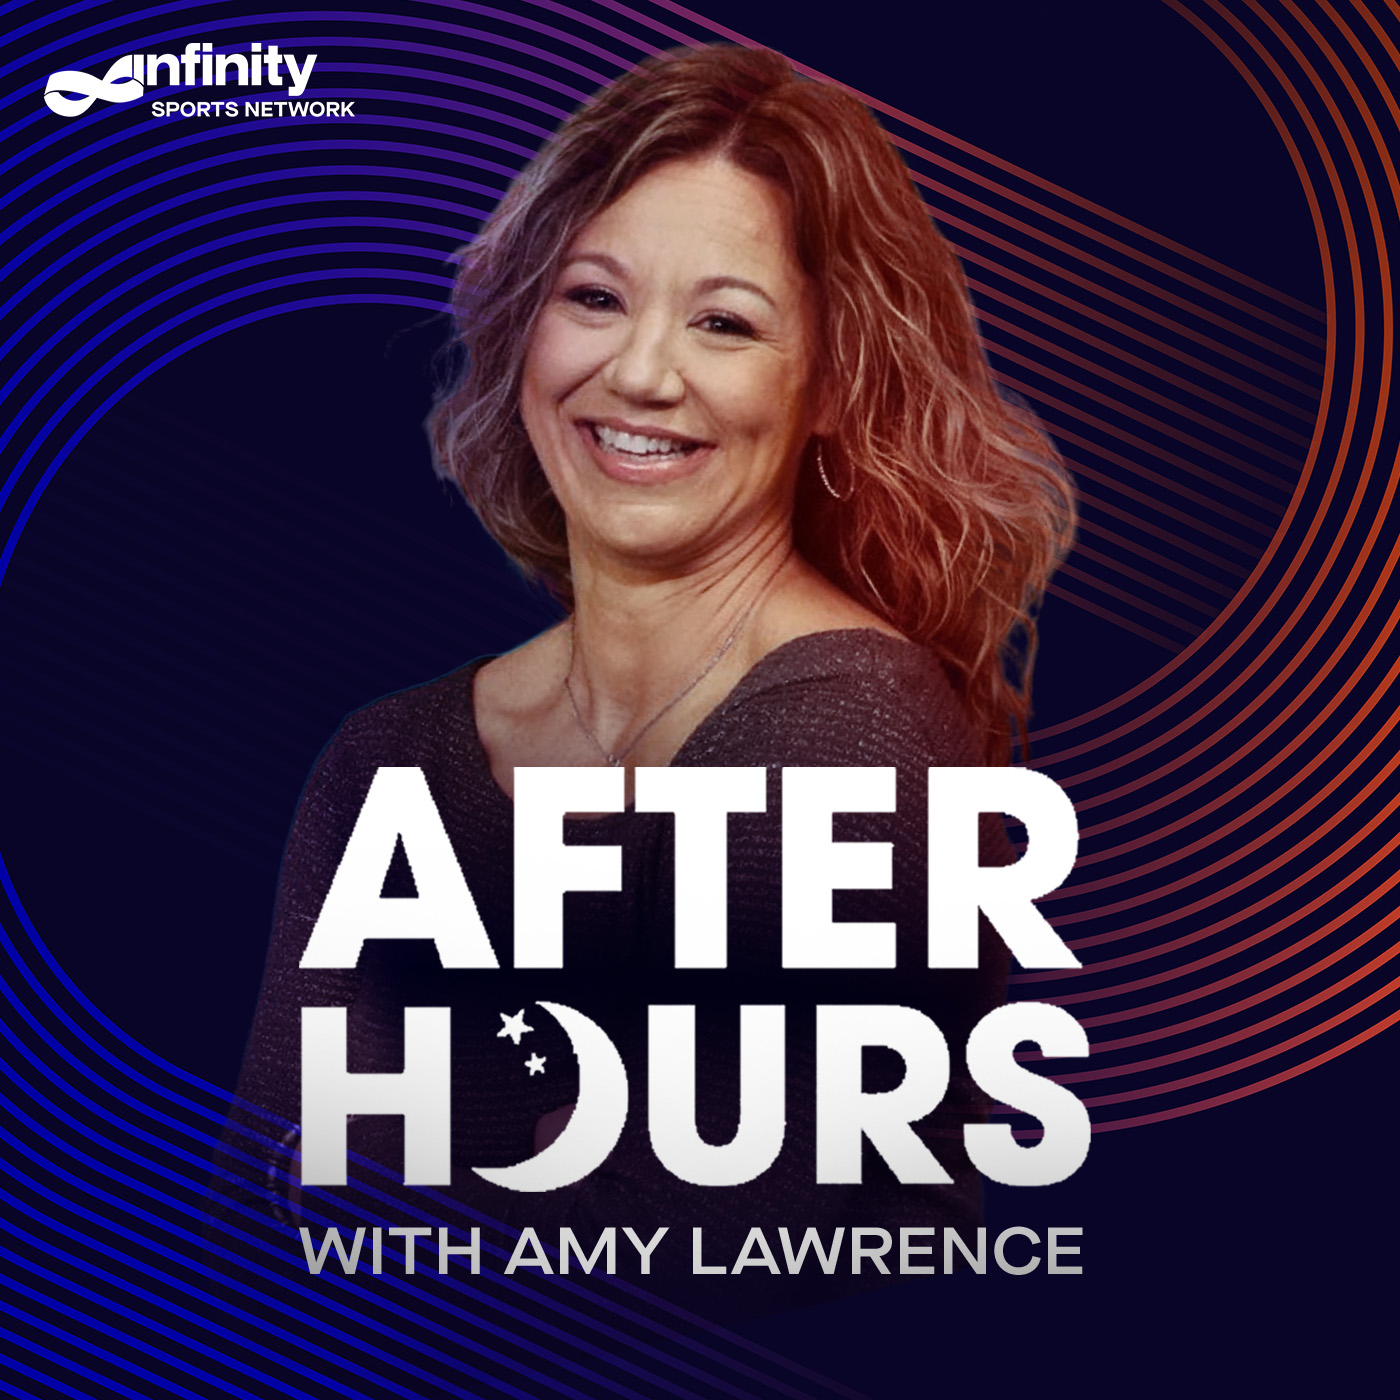 07/30/21 After Hours with Amy Lawrence PODCAST: Hour 3